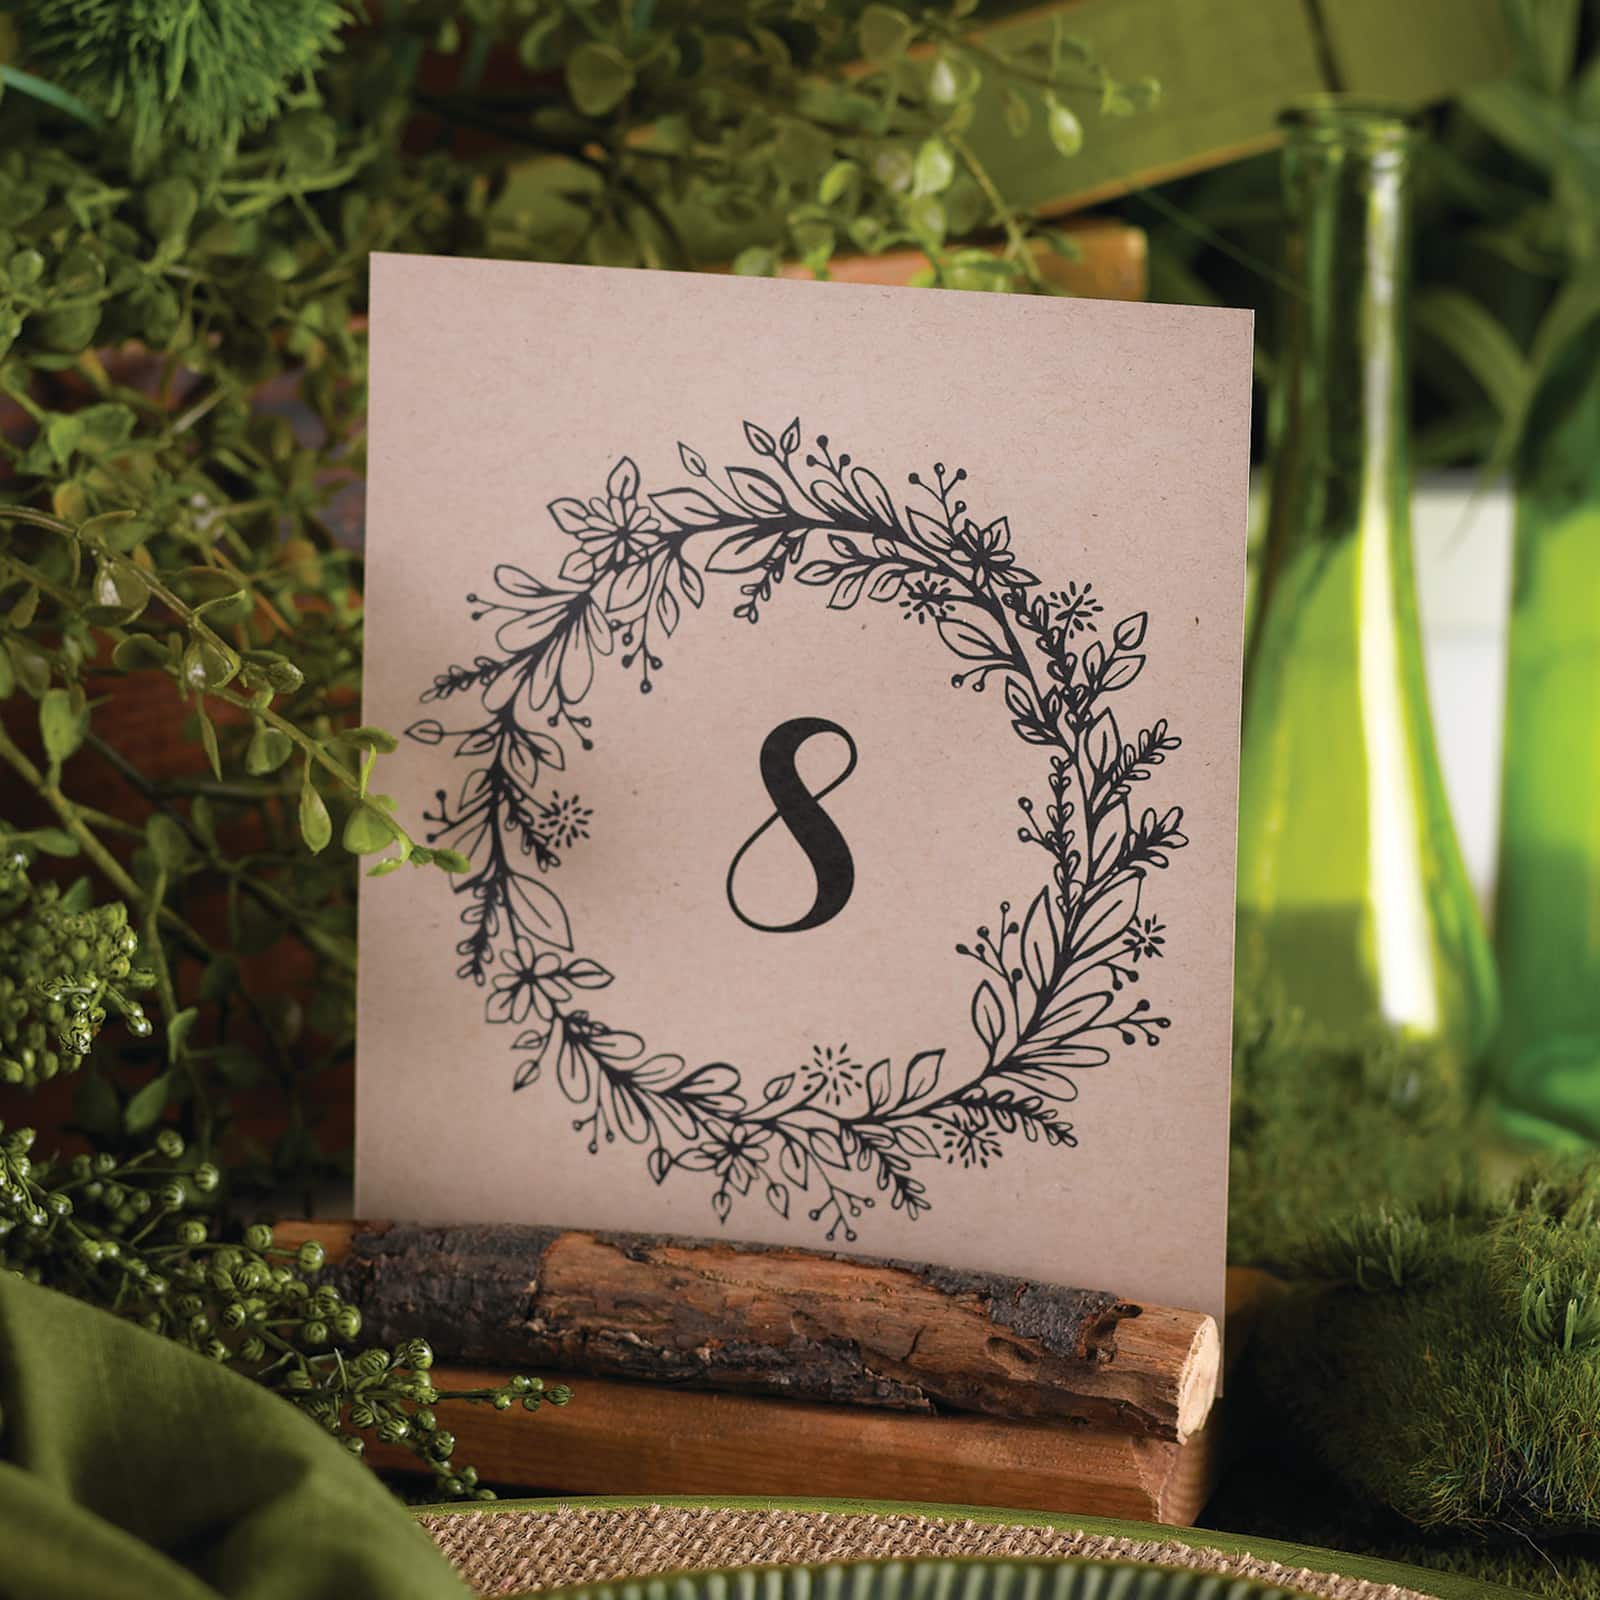 Hortense B. Hewitt Co. Rustic Wreath Table Number Cards